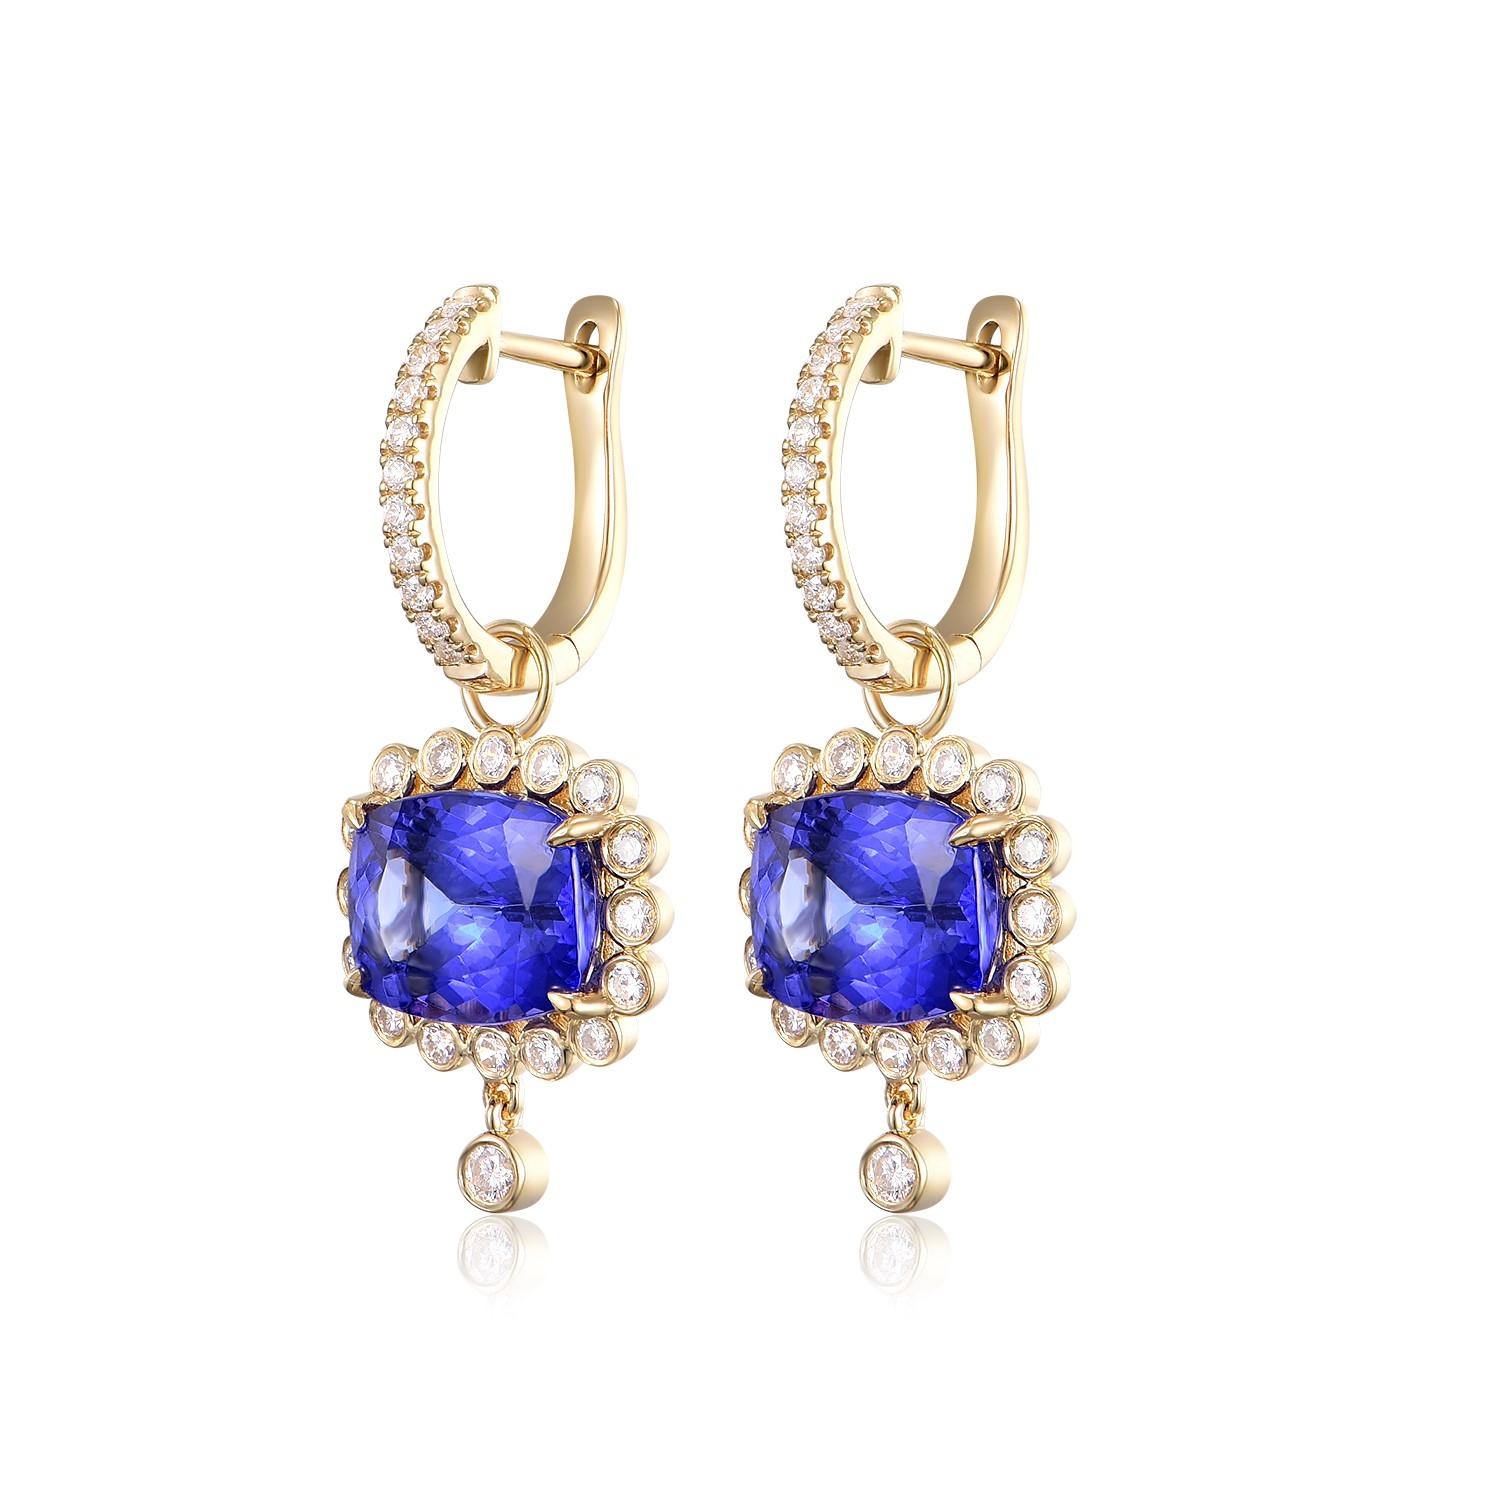 
These are resplendent 18-karat yellow gold earrings, each adorned with a central tanzanite stone totaling 5.68 carats. The tanzanites are cut into cushion shapes, their faceted surfaces revealing a deep and enthralling violet-blue hue that